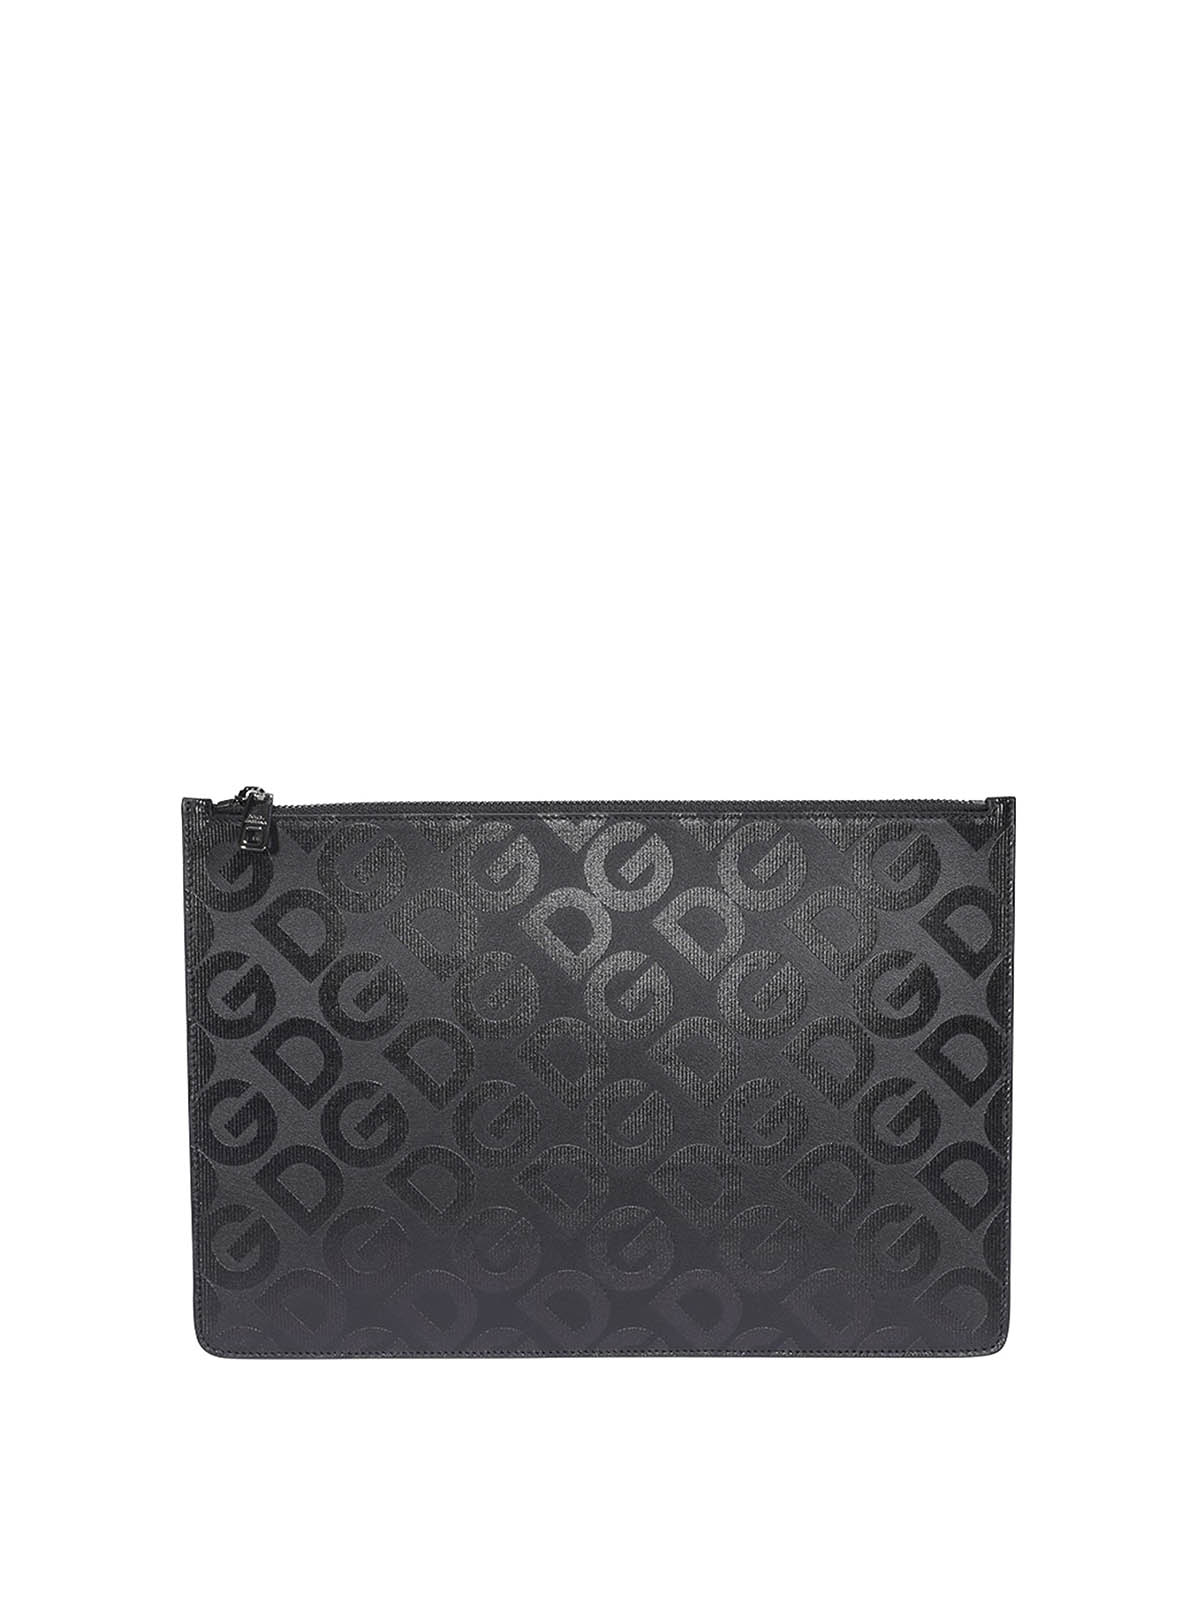 DOLCE & GABBANA EMBOSSED LOGO LEATHER CLUTCH